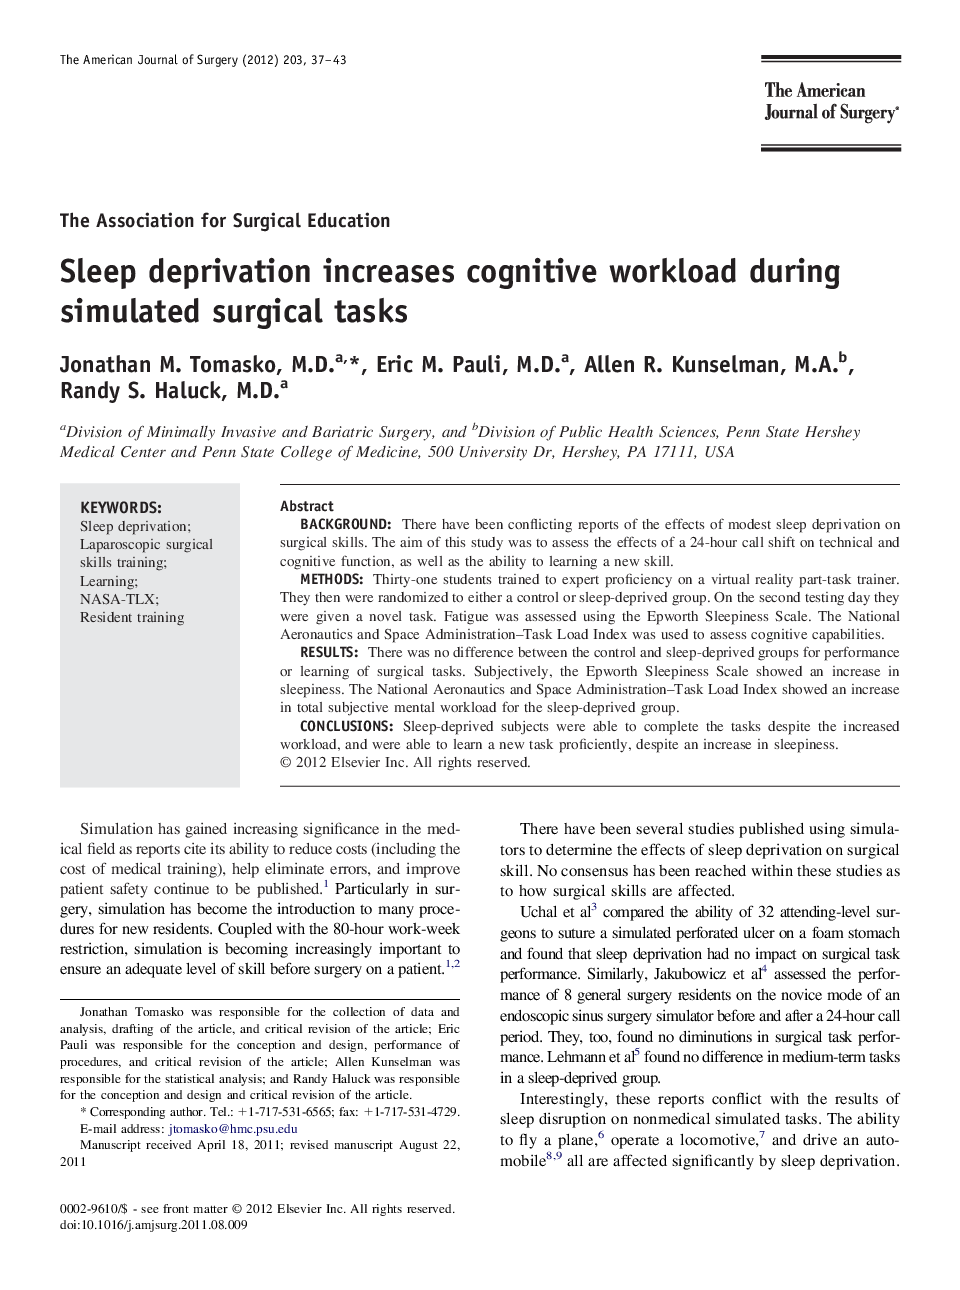 Sleep deprivation increases cognitive workload during simulated surgical tasks 